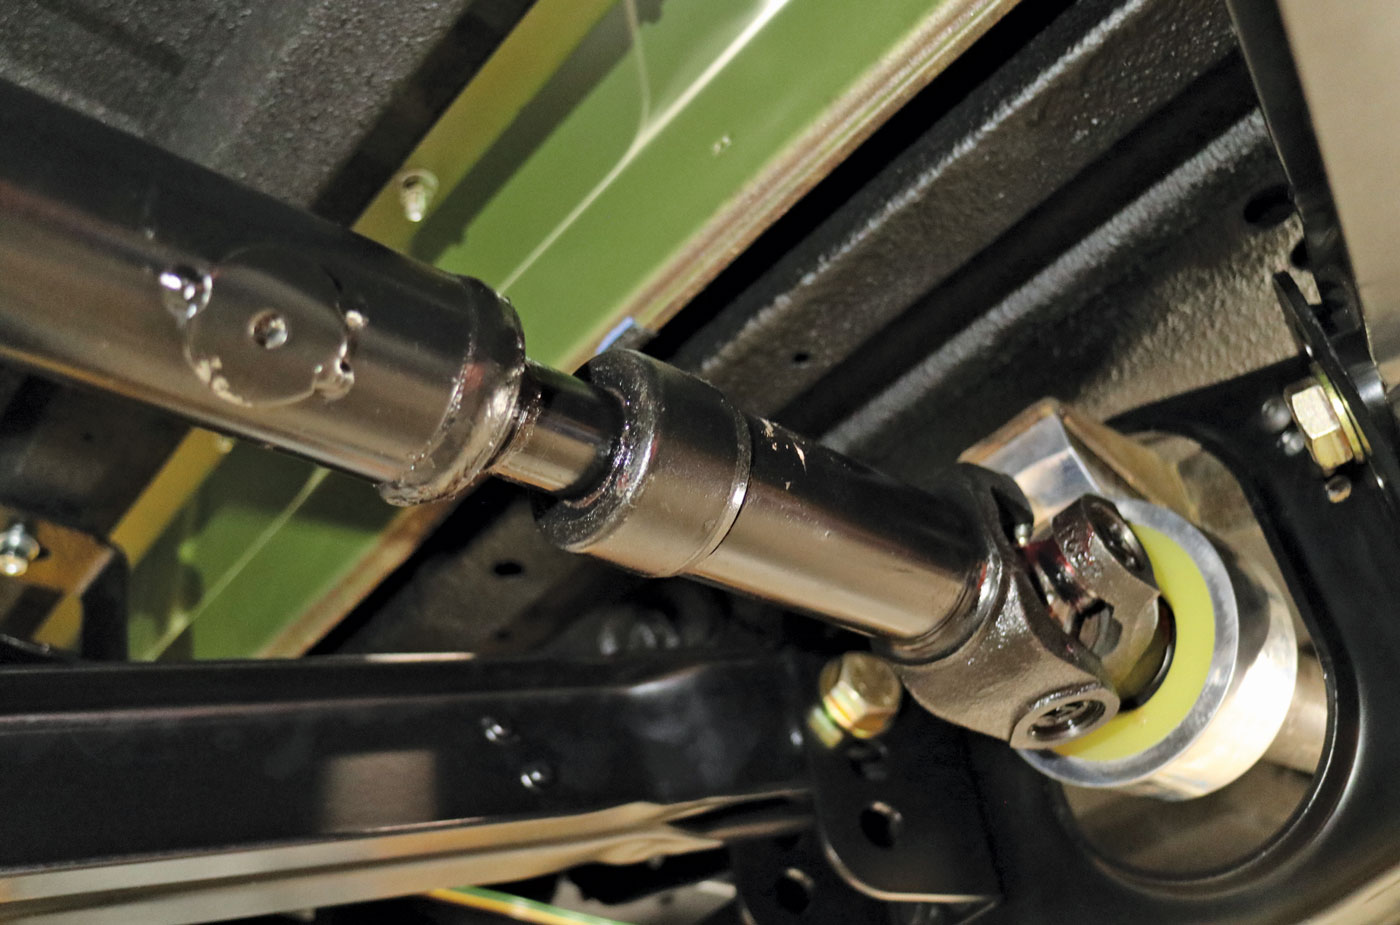 15: With the Slip Shaft Driveline installed, the amount of telescopic movement that’s possible is evident, ensuring that no matter how extreme the suspension travel, the front half of the driveline remains unaffected